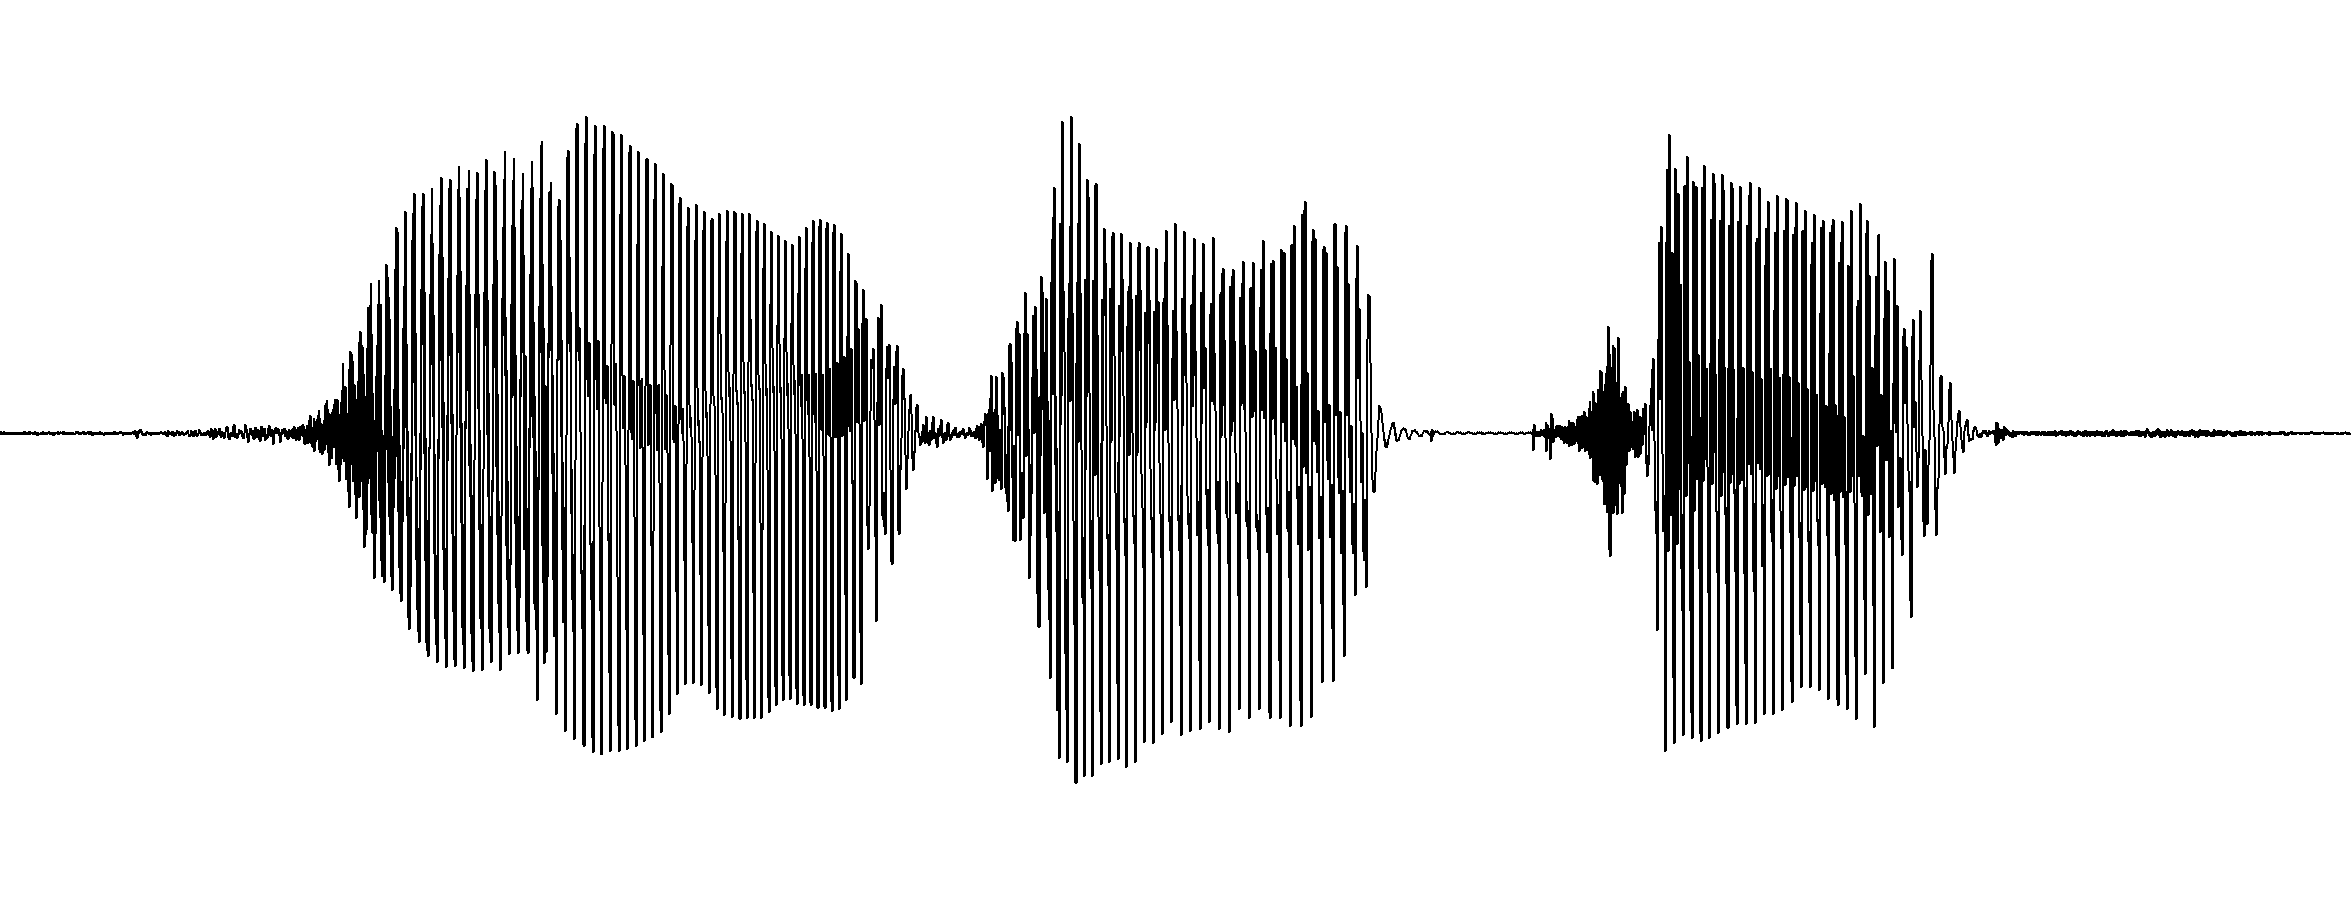 A waveform extracted from Praat of [zi.ɛl tso]